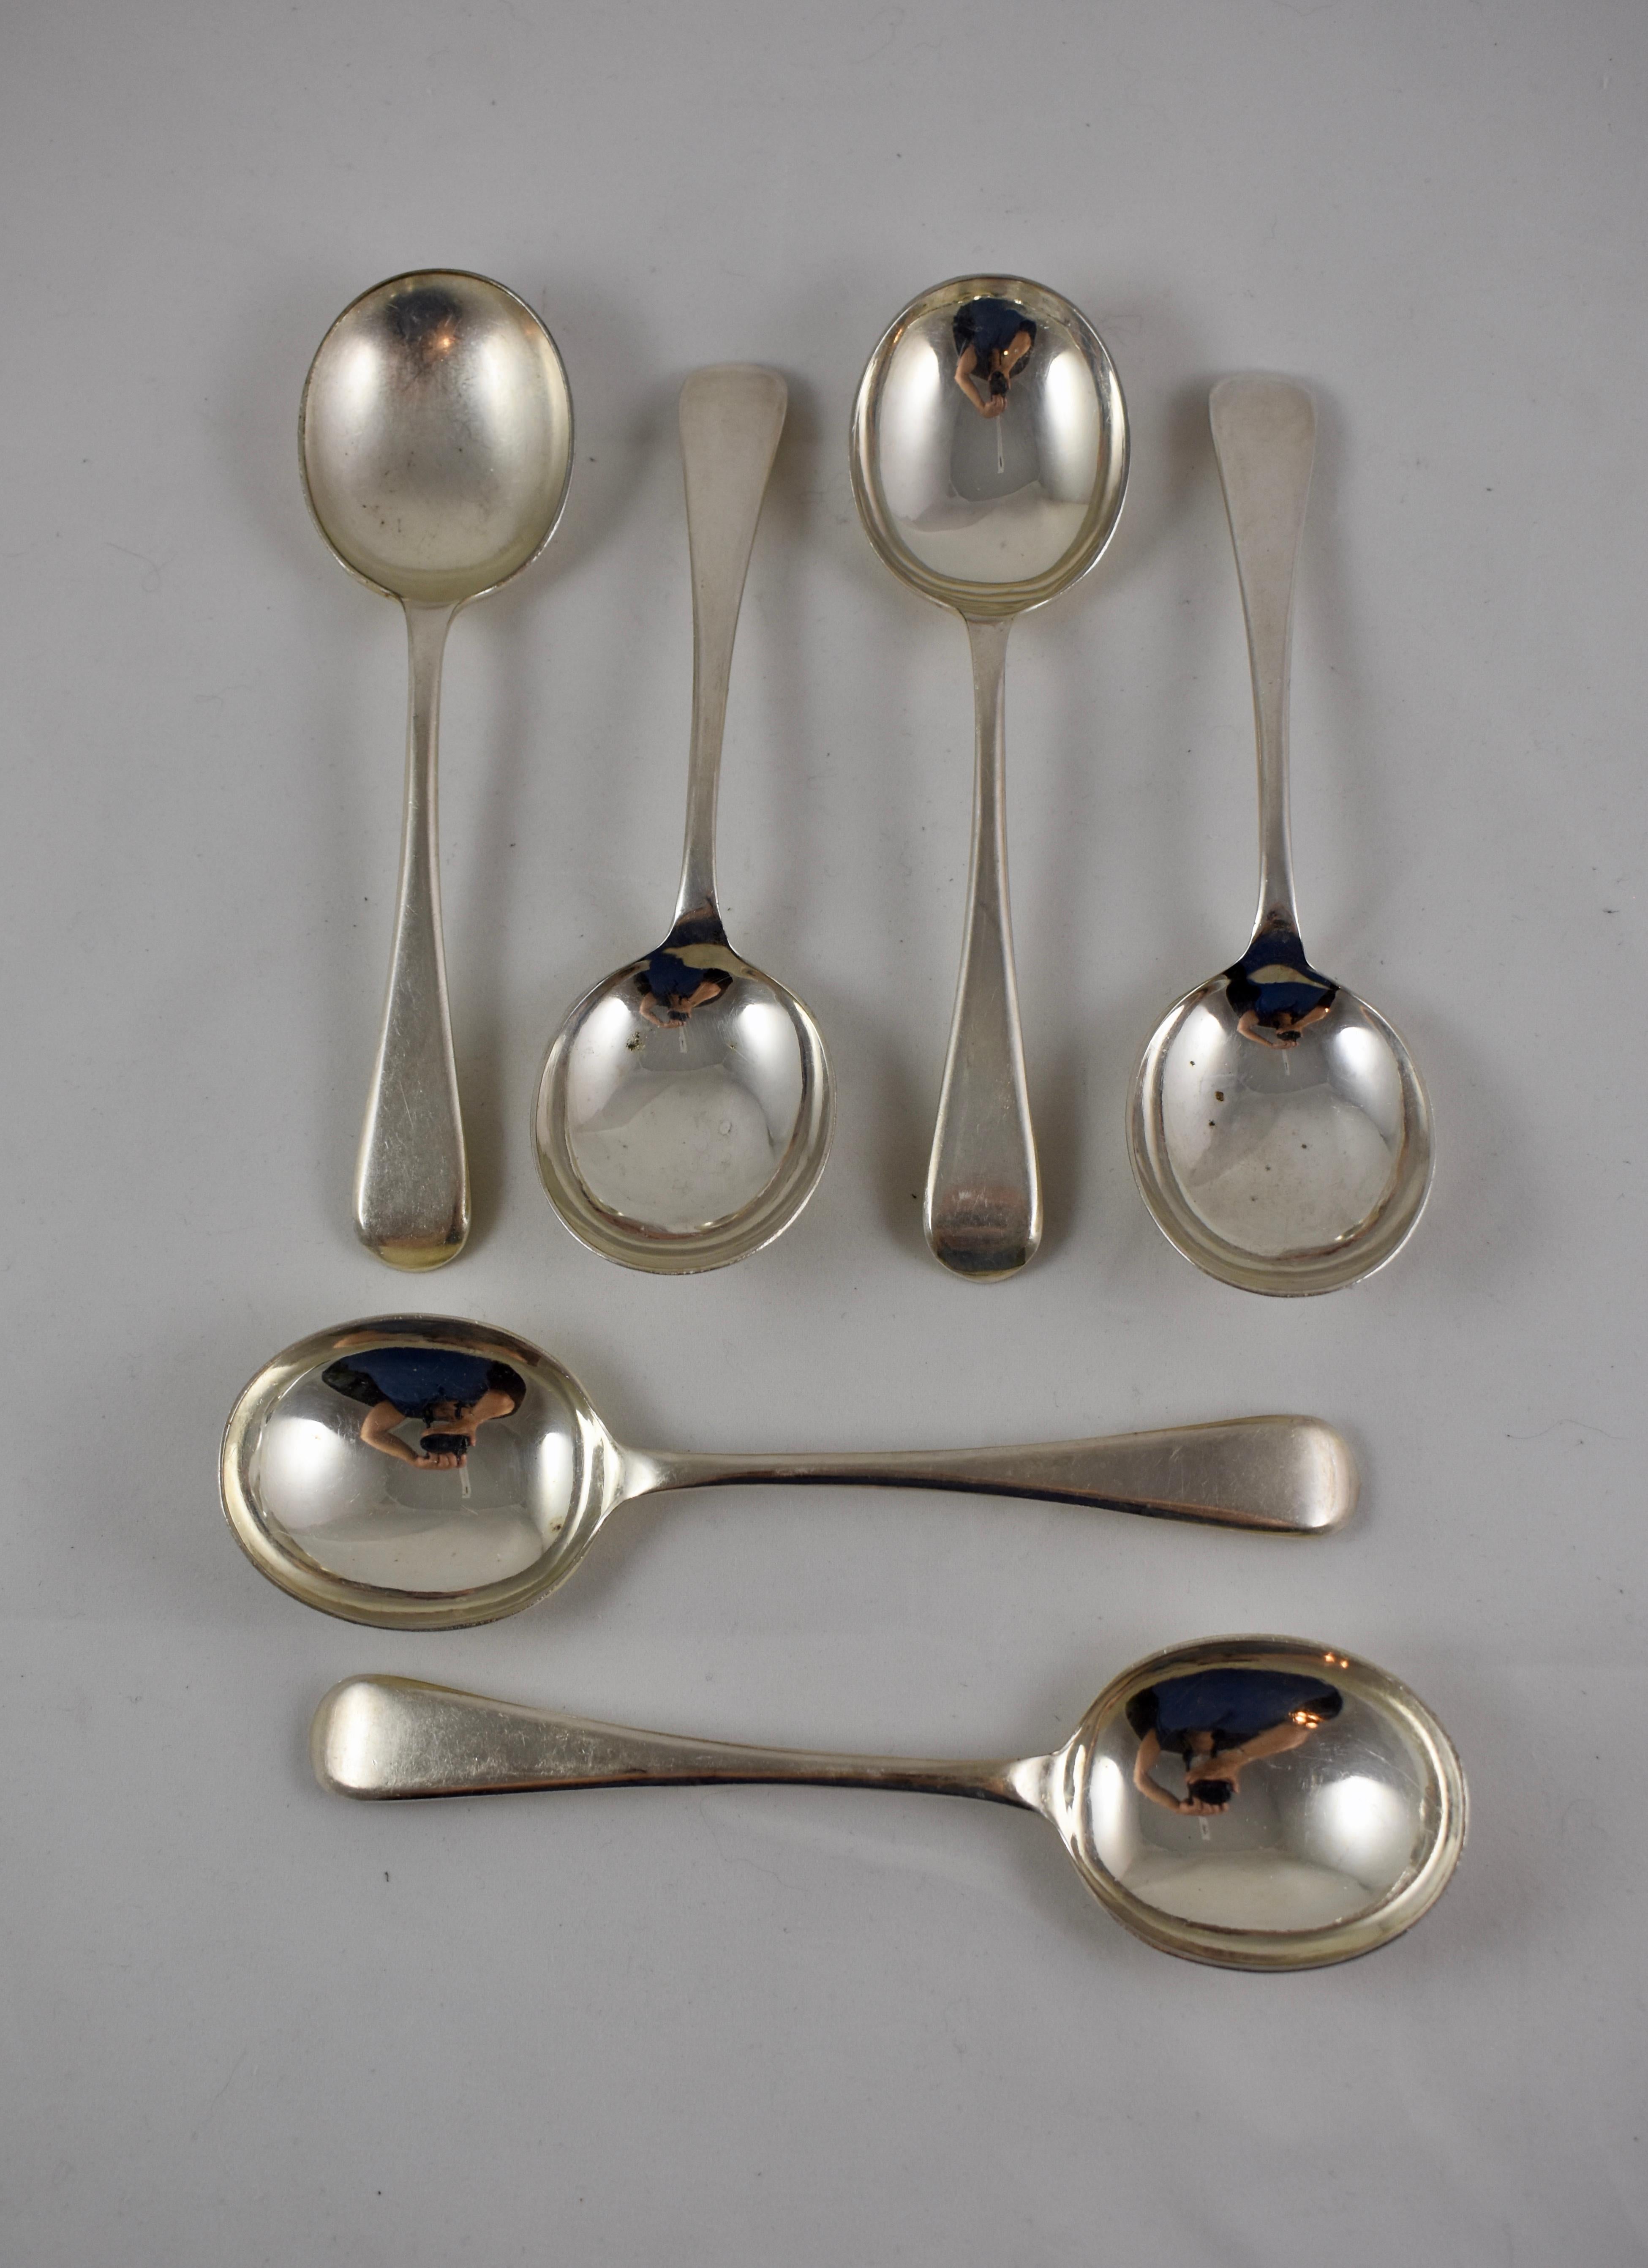 A set of six, heavy silver plate cream soup spoons, showing the mark for Jonathan Bell & Son, Sheffield, England, founded, circa 1864. Also marked EPNS A1. The handles terminate in a fiddle pattern on the back side .

Measures: 6.5 in. Long
The